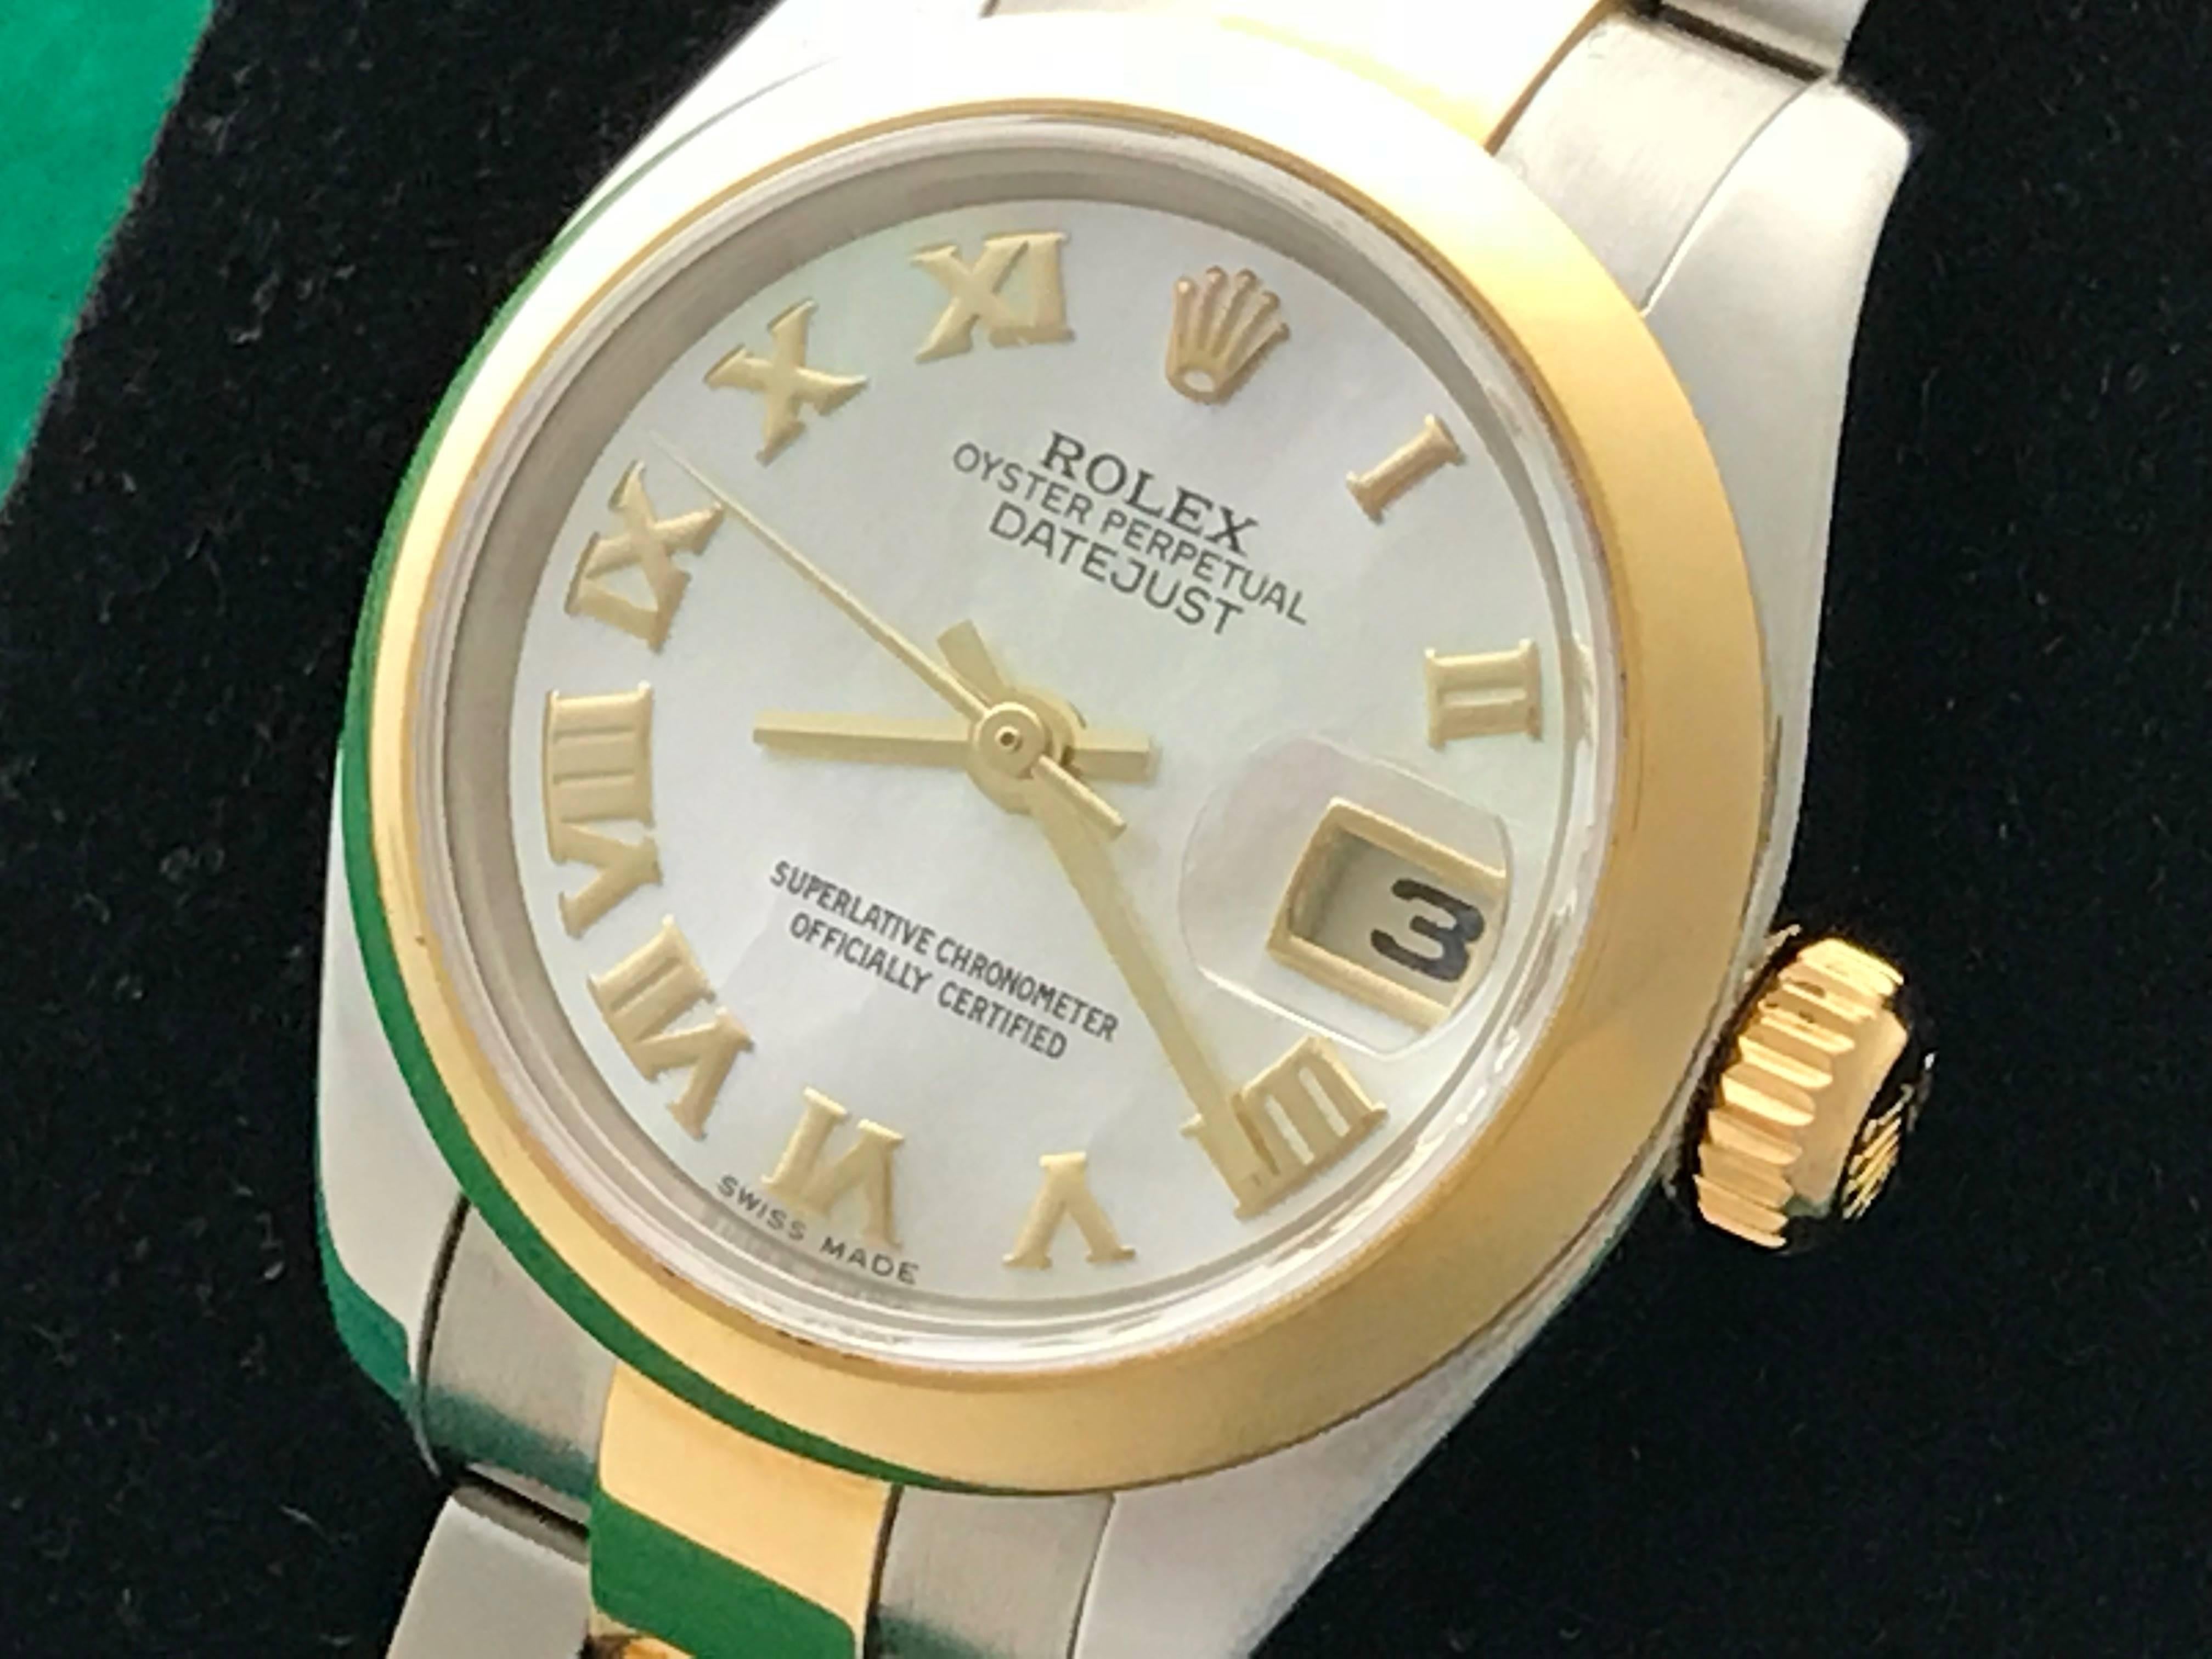 Manufacturer: Rolex
Model Name: Datejust
Model Num: Model 179163
Condition: Pre Owned
Watch Category: Contemporary
Gender: Ladies
Movement Comment: Oyster Perpetual
Movement: Automatic Winding
Dial: Rolex Mother of Pearl Dial with yellow gold Roman